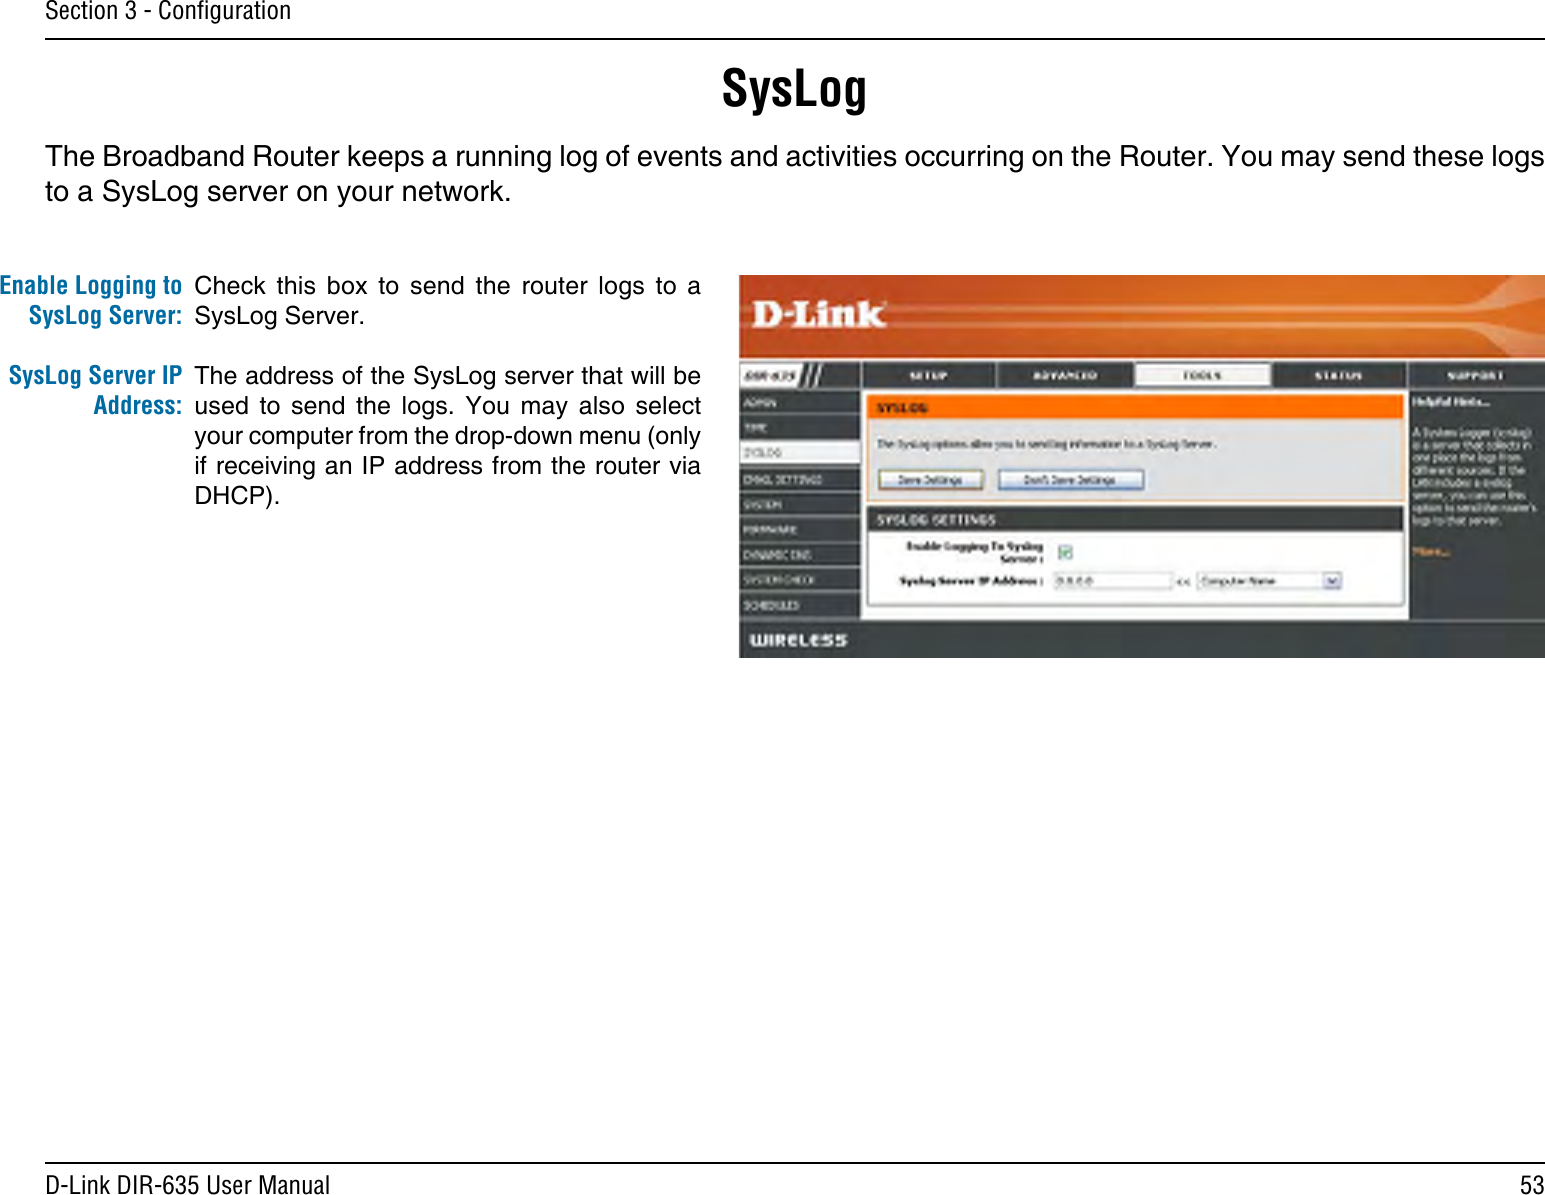 53D-Link DIR-635 User ManualSection 3 - ConﬁgurationSysLogThe Broadband Router keeps a running log of events and activities occurring on the Router. You may send these logs to a SysLog server on your network.Enable Logging to SysLog Server:SysLog Server IP Address:Check  this  box  to  send  the  router  logs  to  a SysLog Server.The address of the SysLog server that will be used  to  send  the  logs.  You  may  also  select your computer from the drop-down menu (only if receiving an IP address from the router via DHCP).